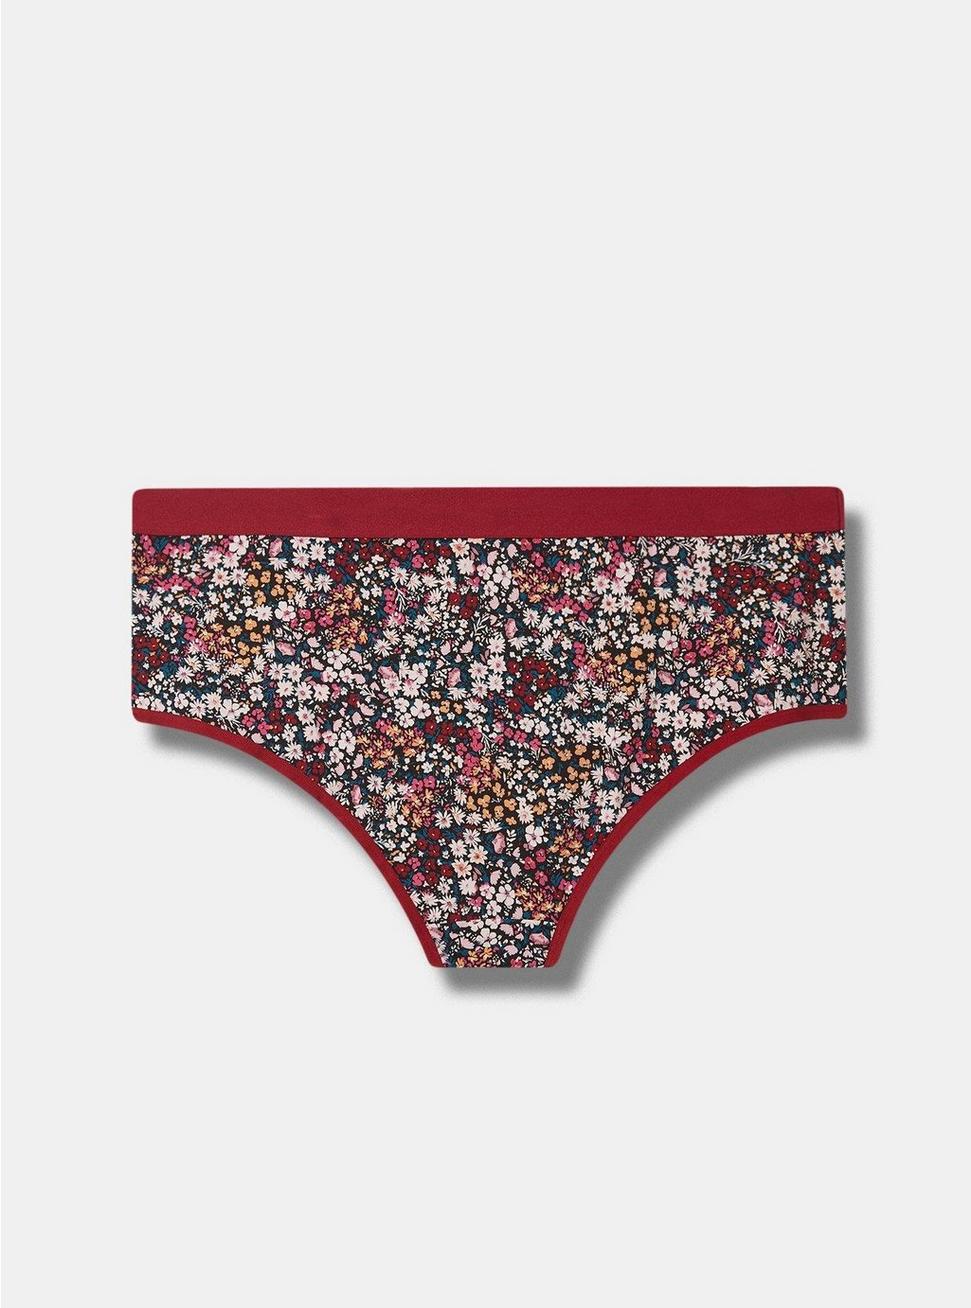 Cotton Mid-Rise Cheeky Panty, HARVEST DITSY FLORAL BLACK, alternate